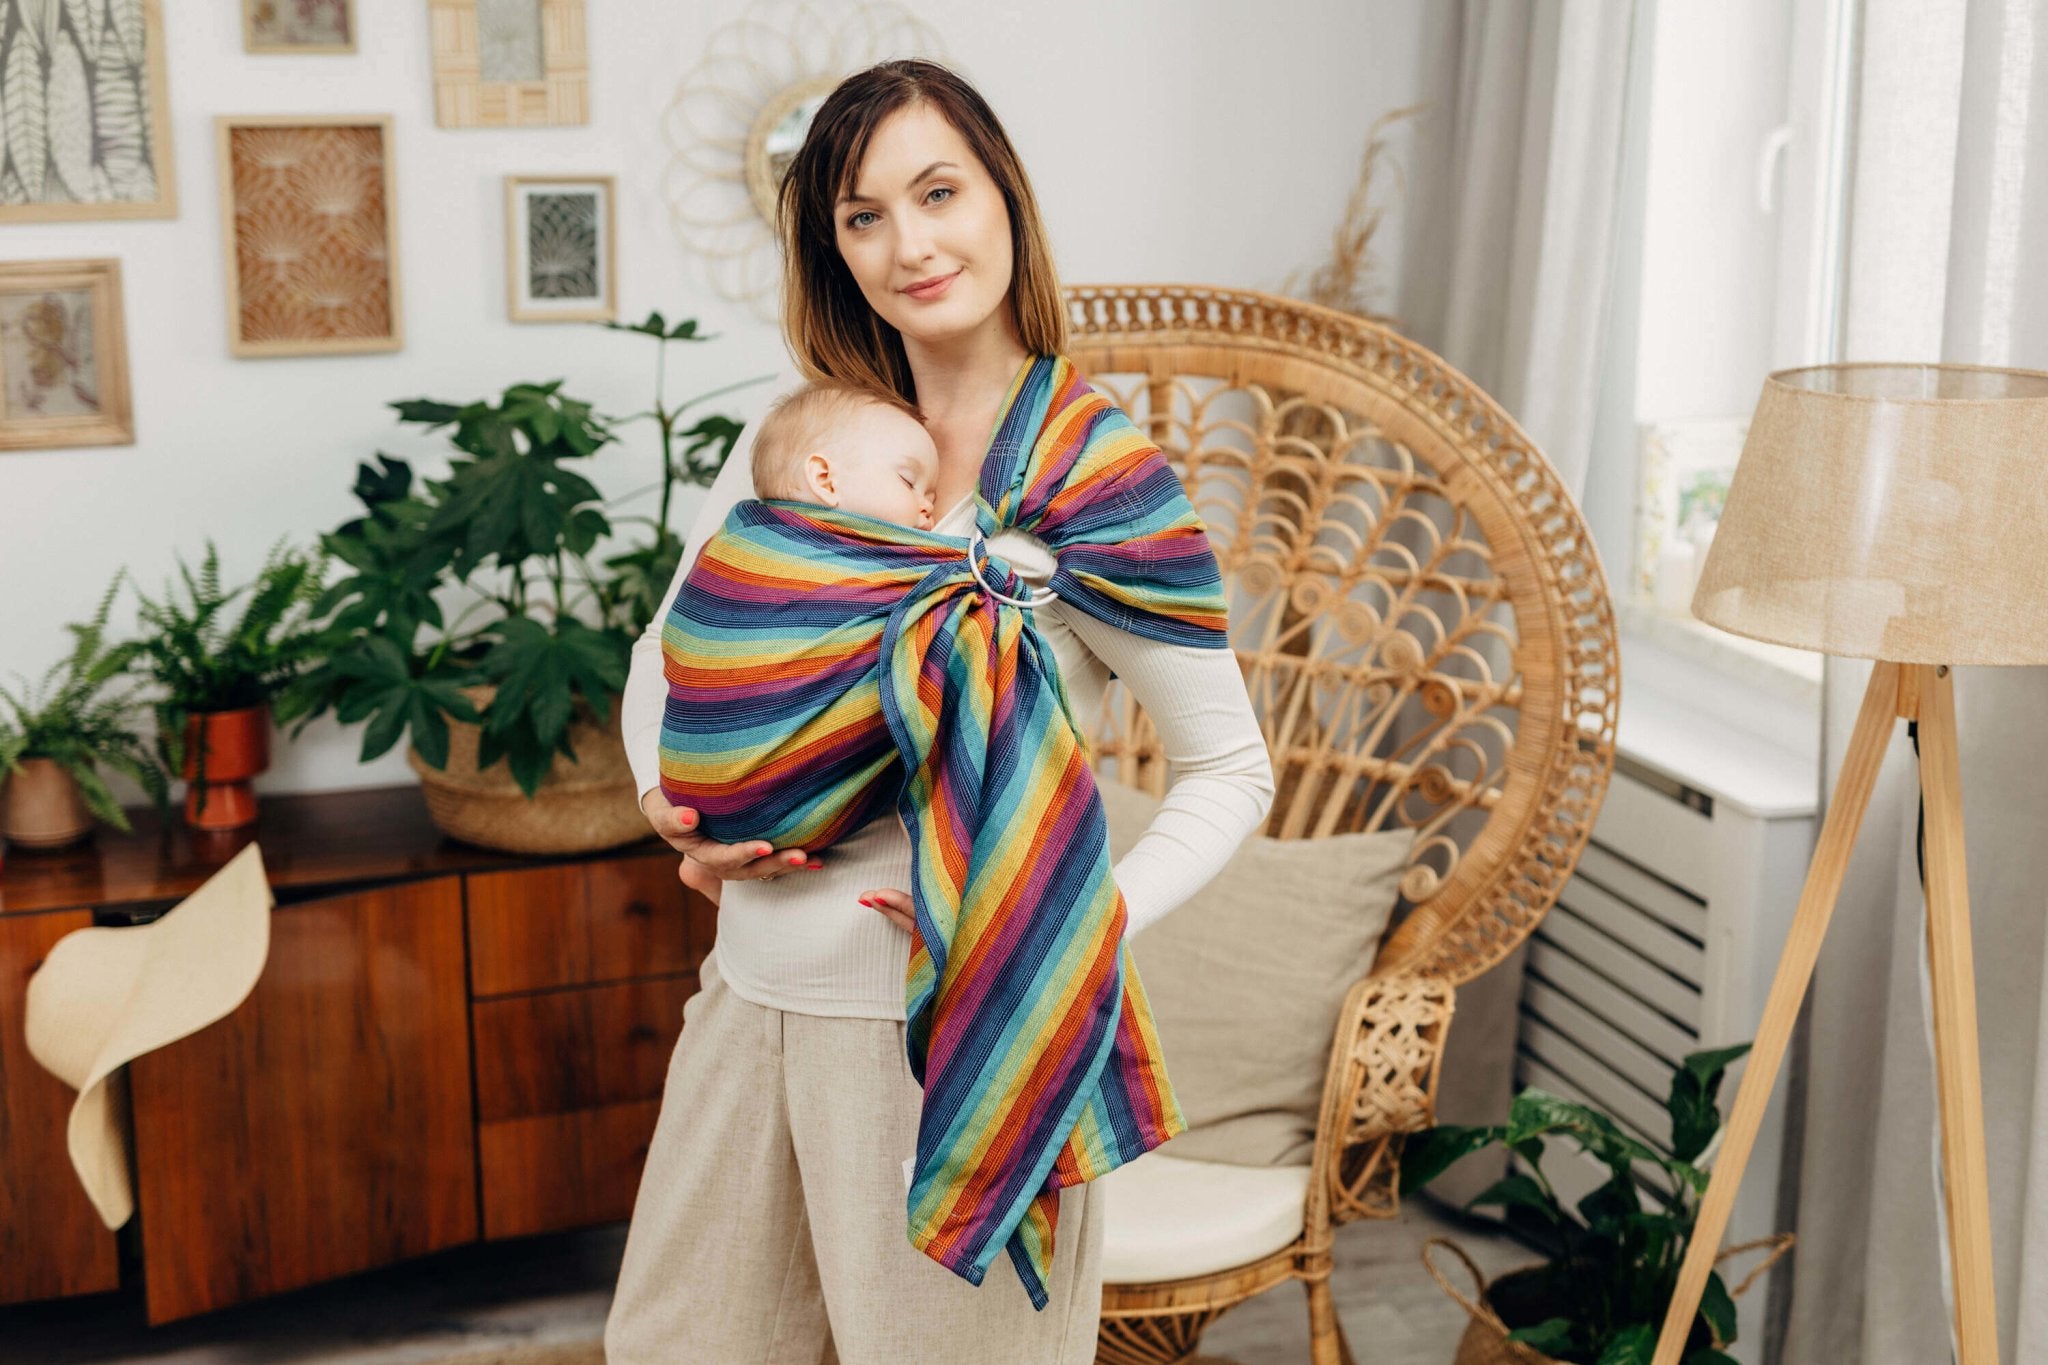 AELLANA Ring Sling Baby Carrier - Luxury Bamboo and Hemp Baby Sling - Soft,  Durable, and Lightweight Wrap - Newborn to Toddler : Amazon.co.uk: Baby  Products